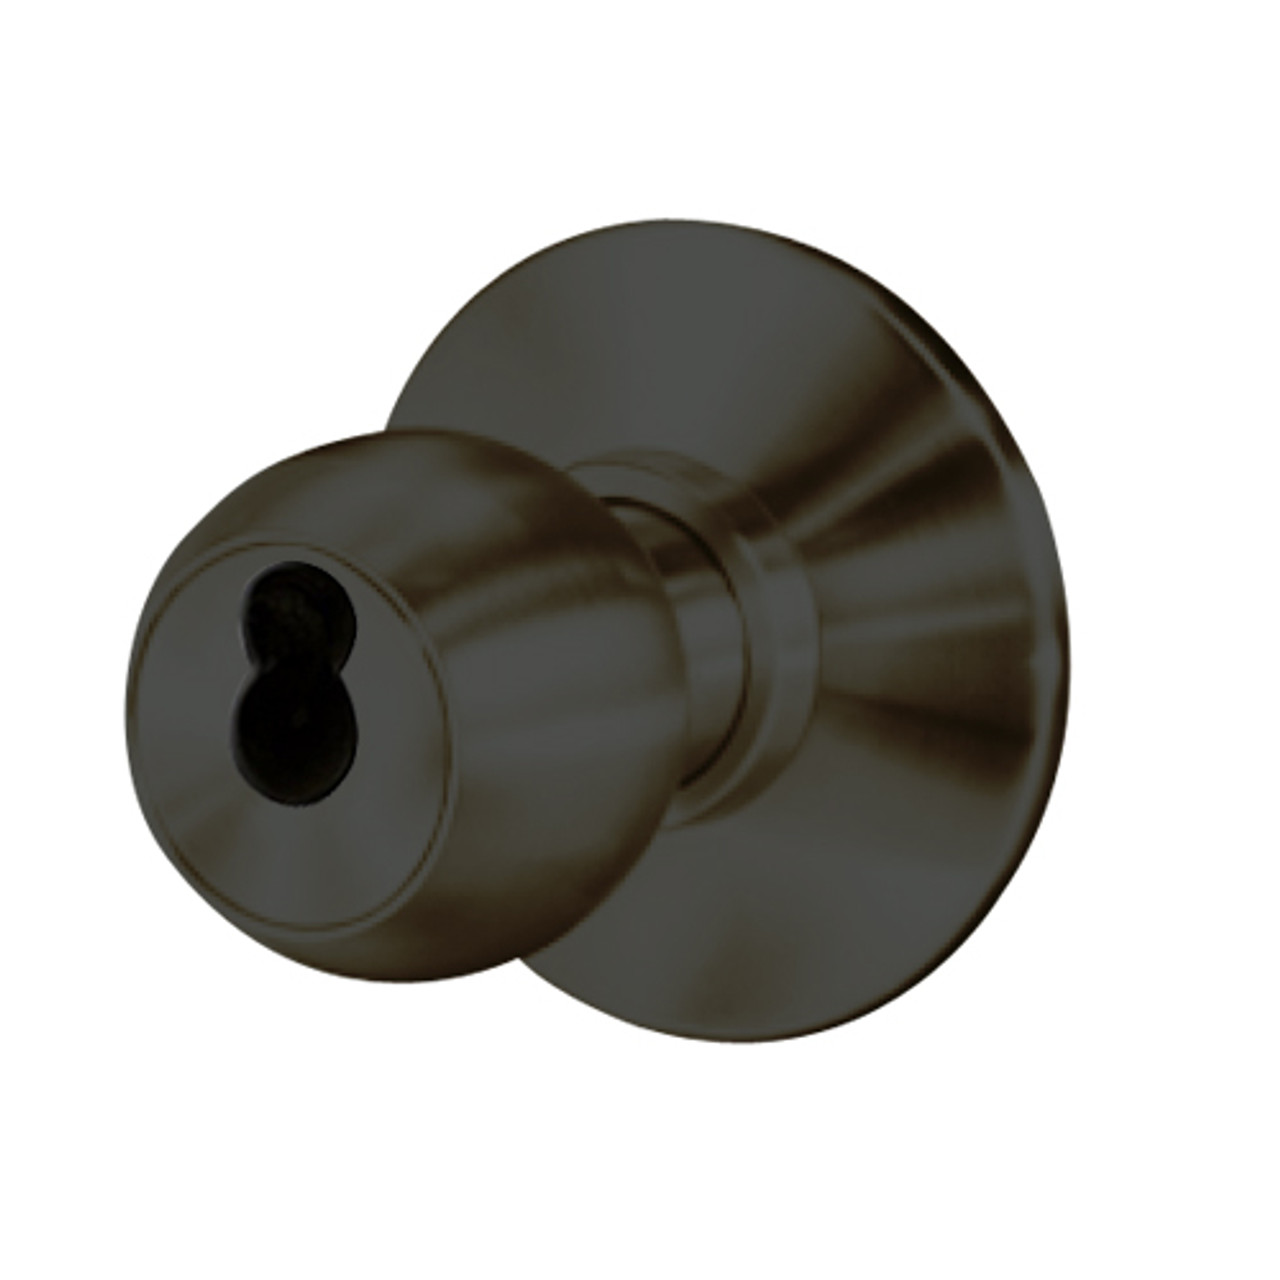 8K37YR4DSTK613 Best 8K Series Exit Heavy Duty Cylindrical Knob Locks with Round Style in Oil Rubbed Bronze